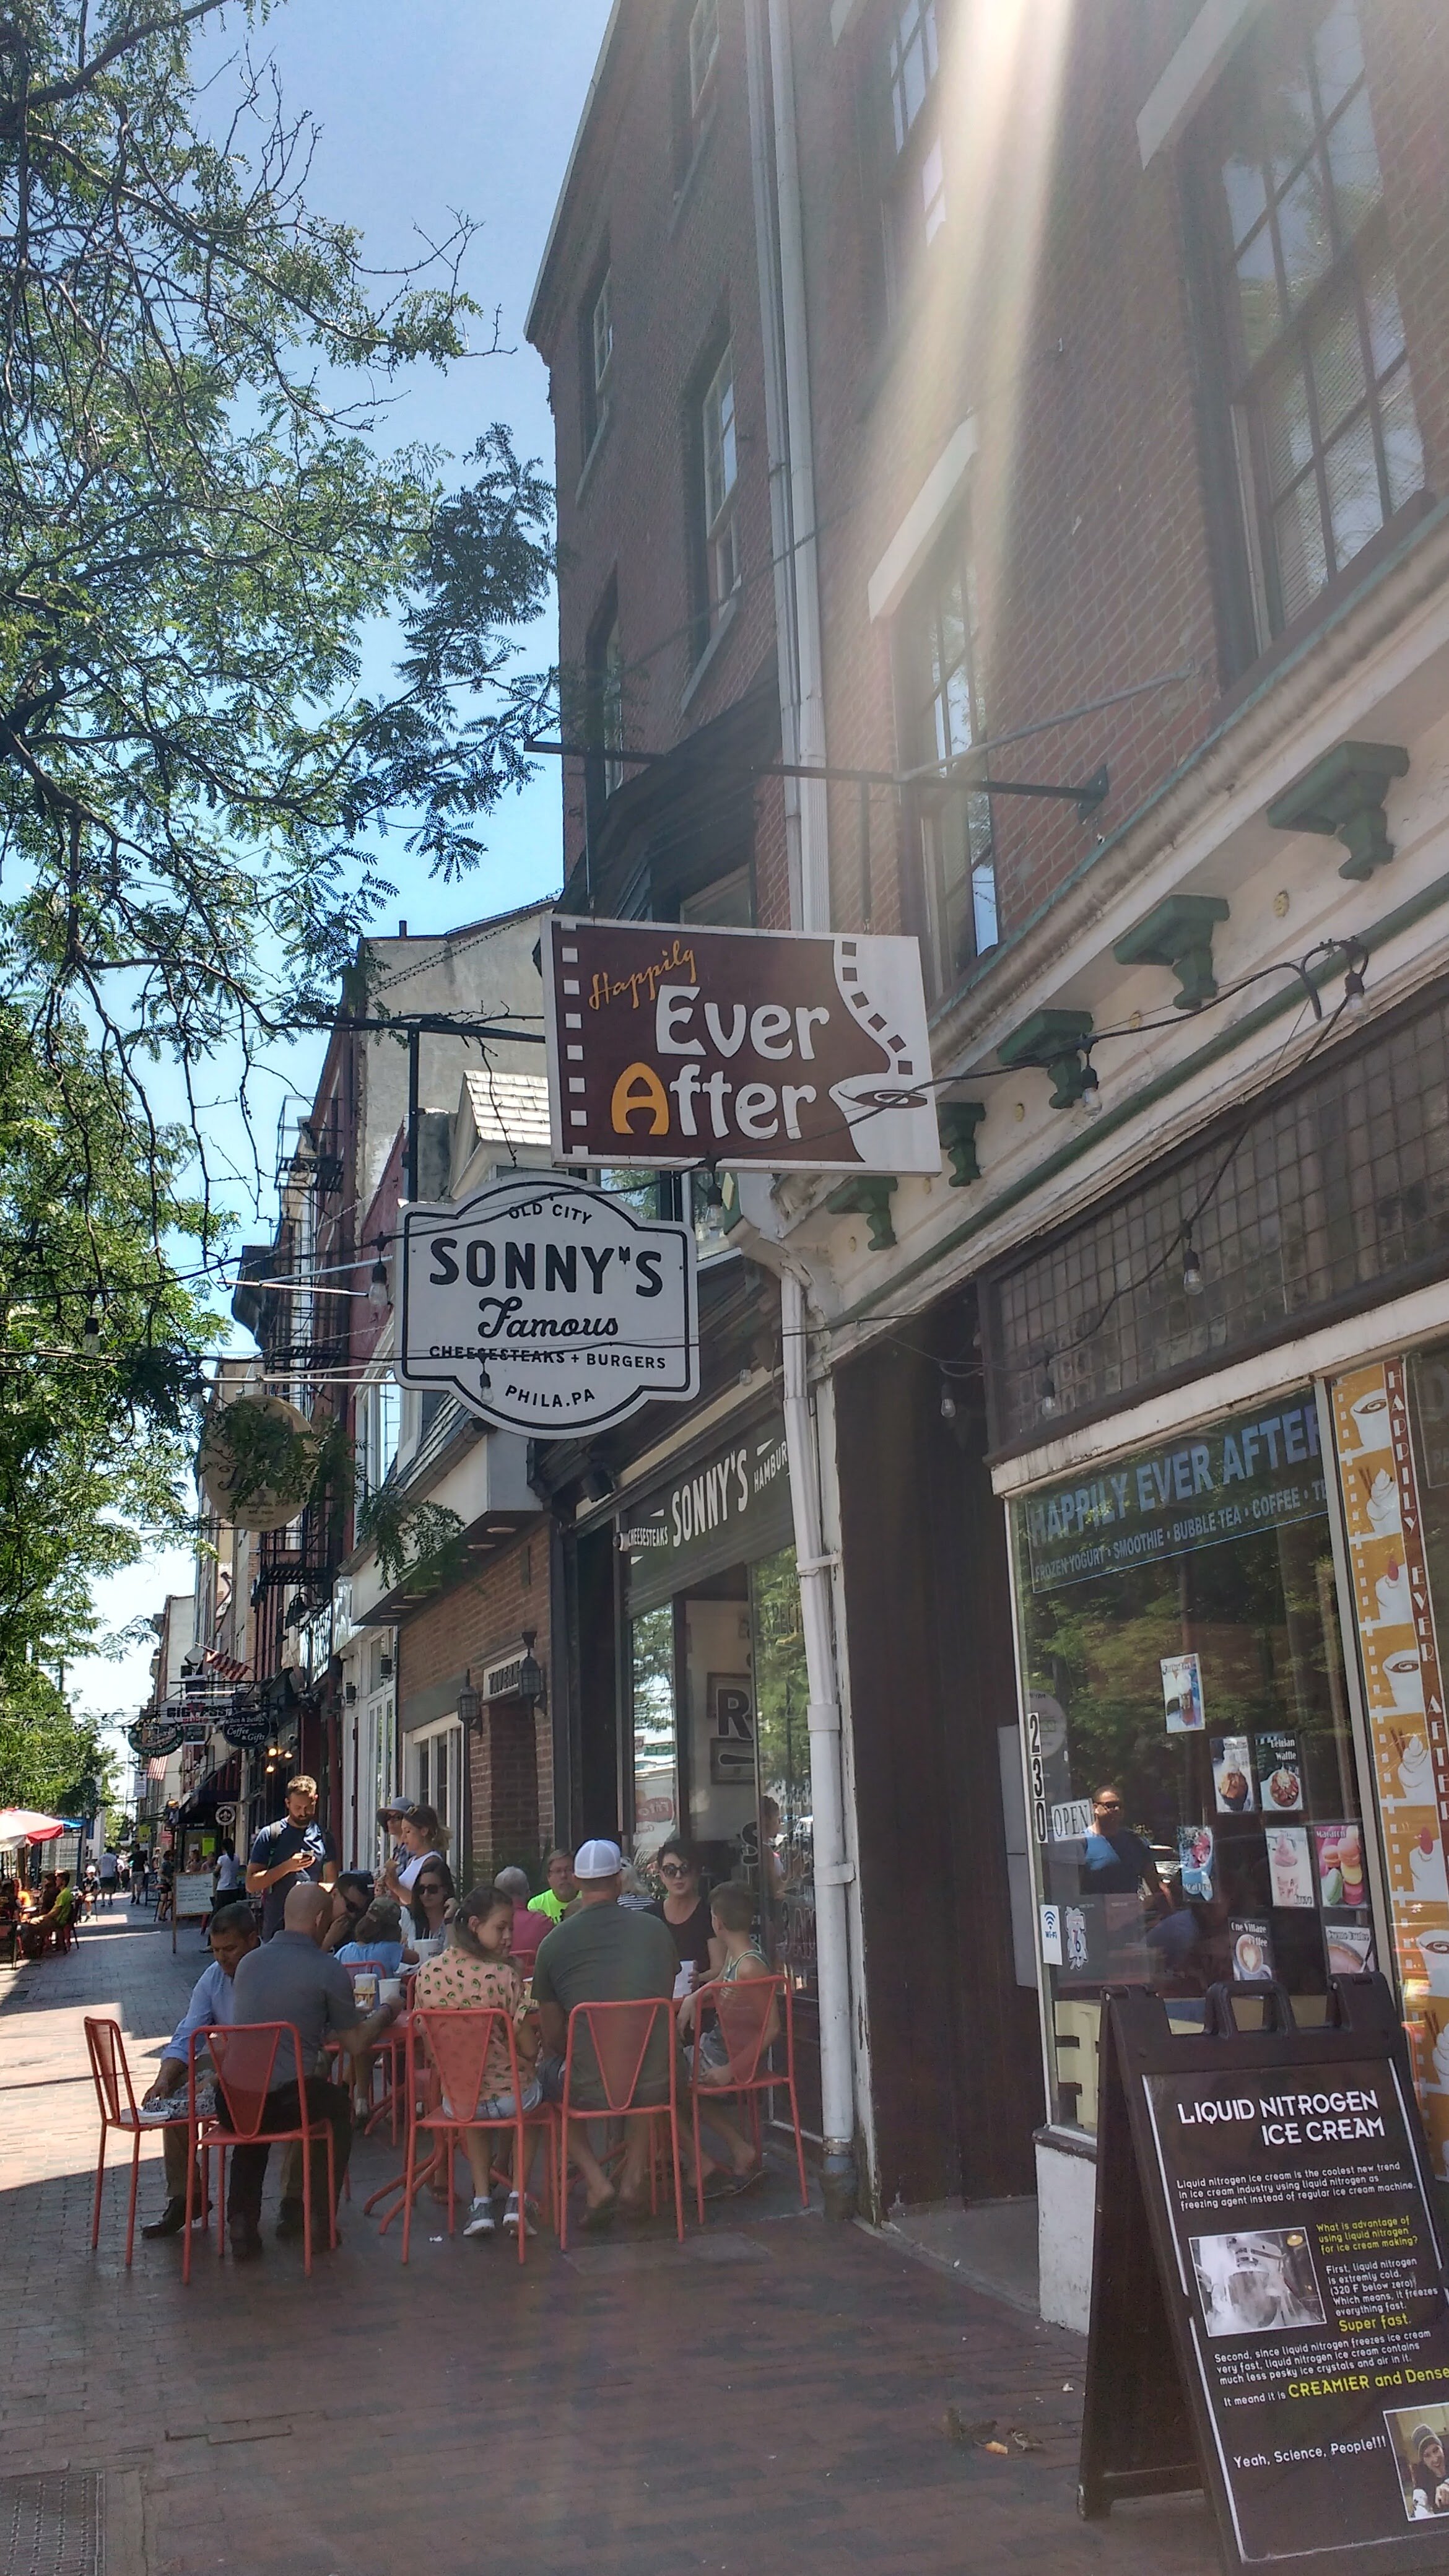 We got our cheesesteak’s at Sonny’s.Of course, I was photographing the cute “Ever After” sign, but you know…